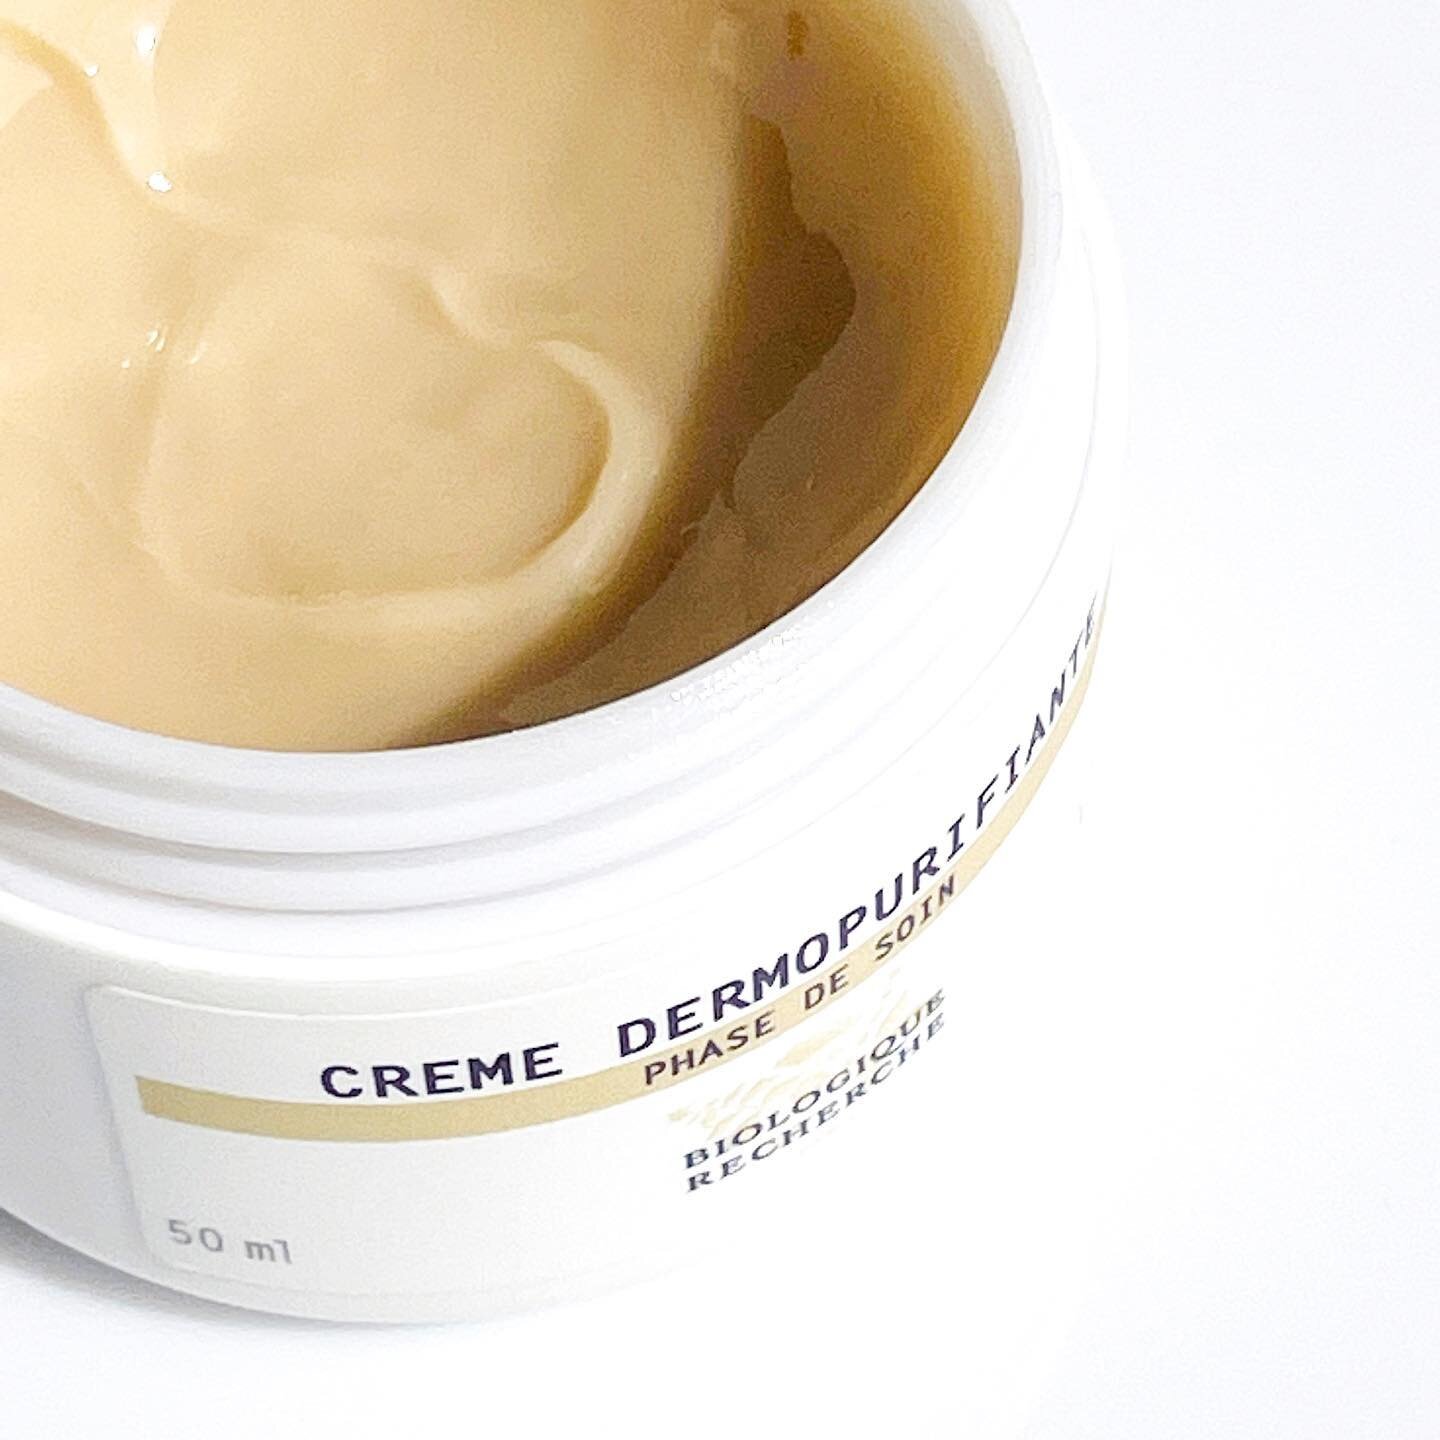 Cr&egrave;me Dermopurifiante aka the only cream whose results my husband actually noticed! //🥇
&mdash;&mdash;&mdash;
✨I&rsquo;ve been dealing with a bit of congestion around my chin and had heard incredible things about this @biologique_recherche fo